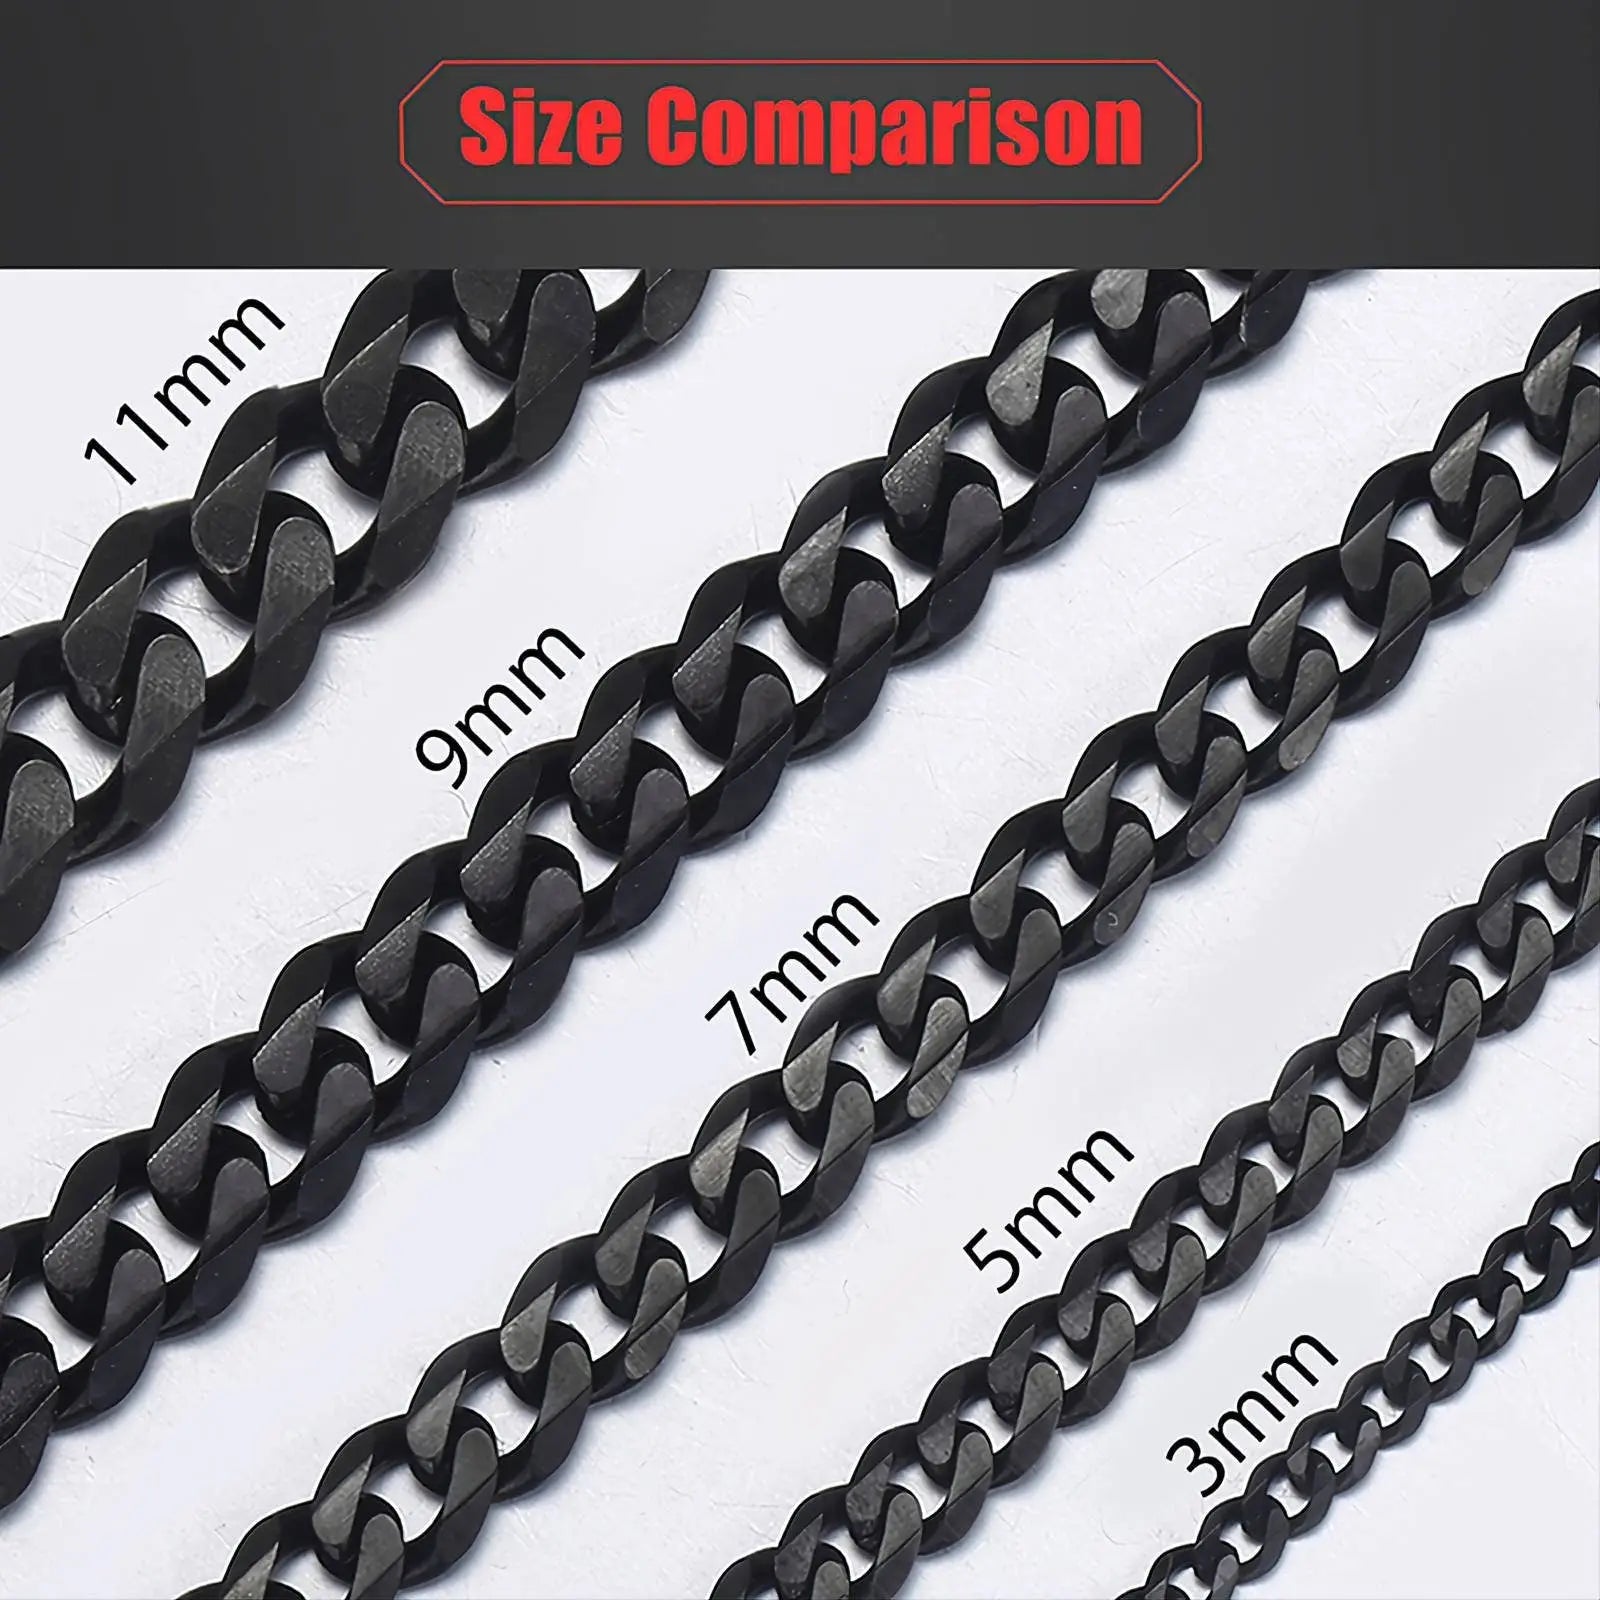 Black Cuban Link Necklace, 3mm/5mm/7mm/9mm/11mm Mens Gift, Gift for Dad, Wife Husband, Stainless Steel Necklace, Black Enamel Necklace JettsJewelers